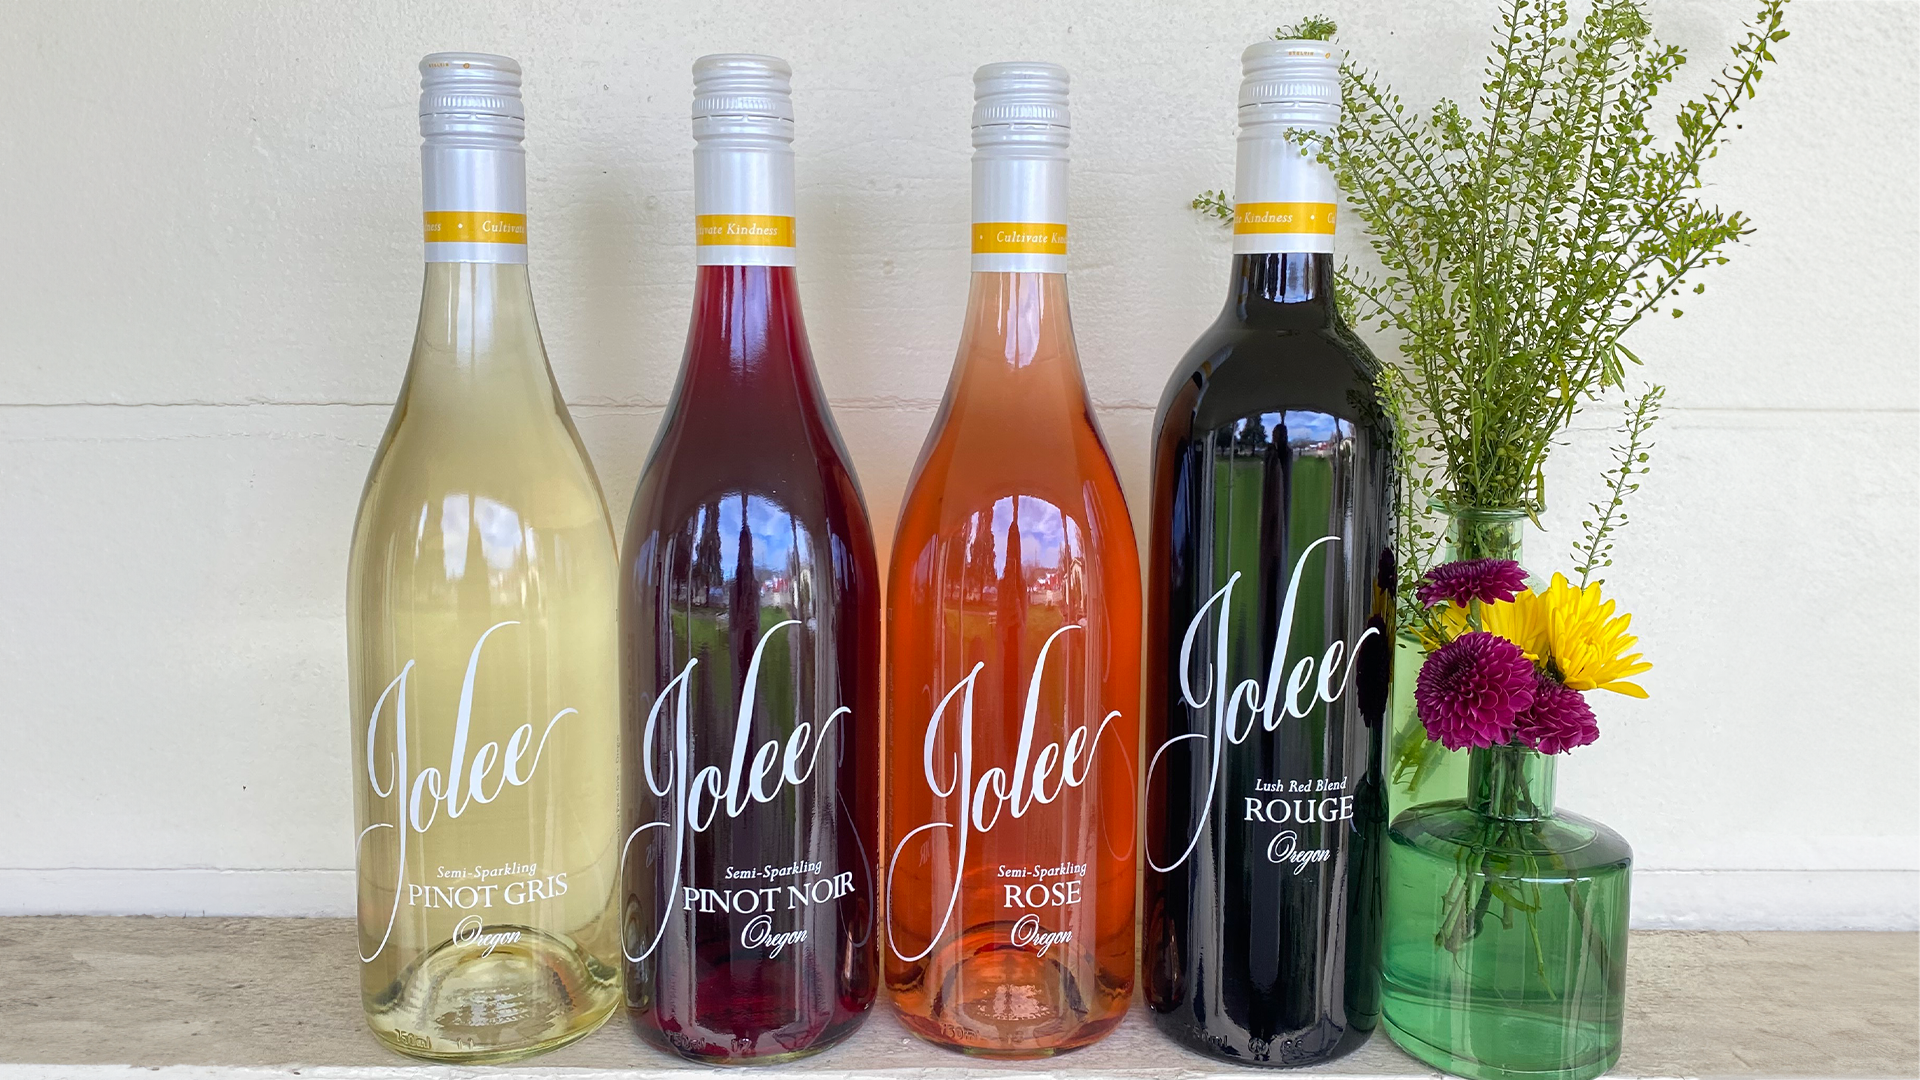 Jolee Wines welcomes its newest addition: Semi-Sparkling Pinot Noir